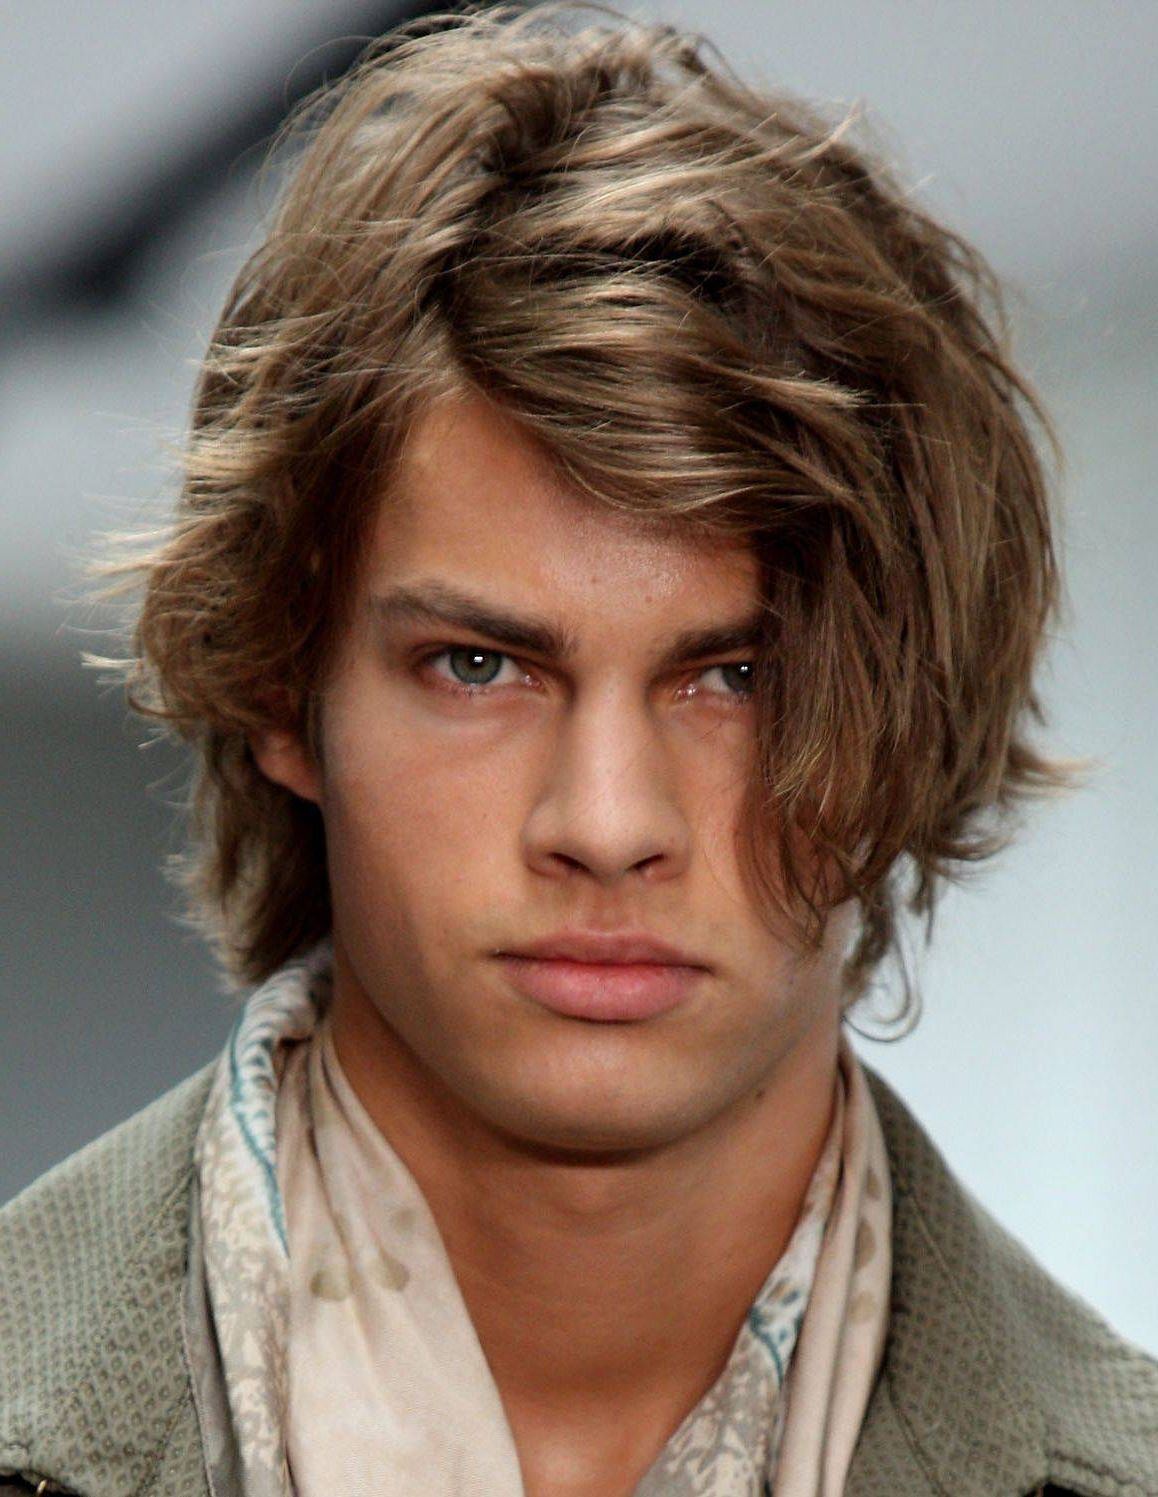 Men's Hairstyles For Spring Summer 2019 Regarding Most Recently Released Medium Hairstyles For Spring (View 19 of 20)